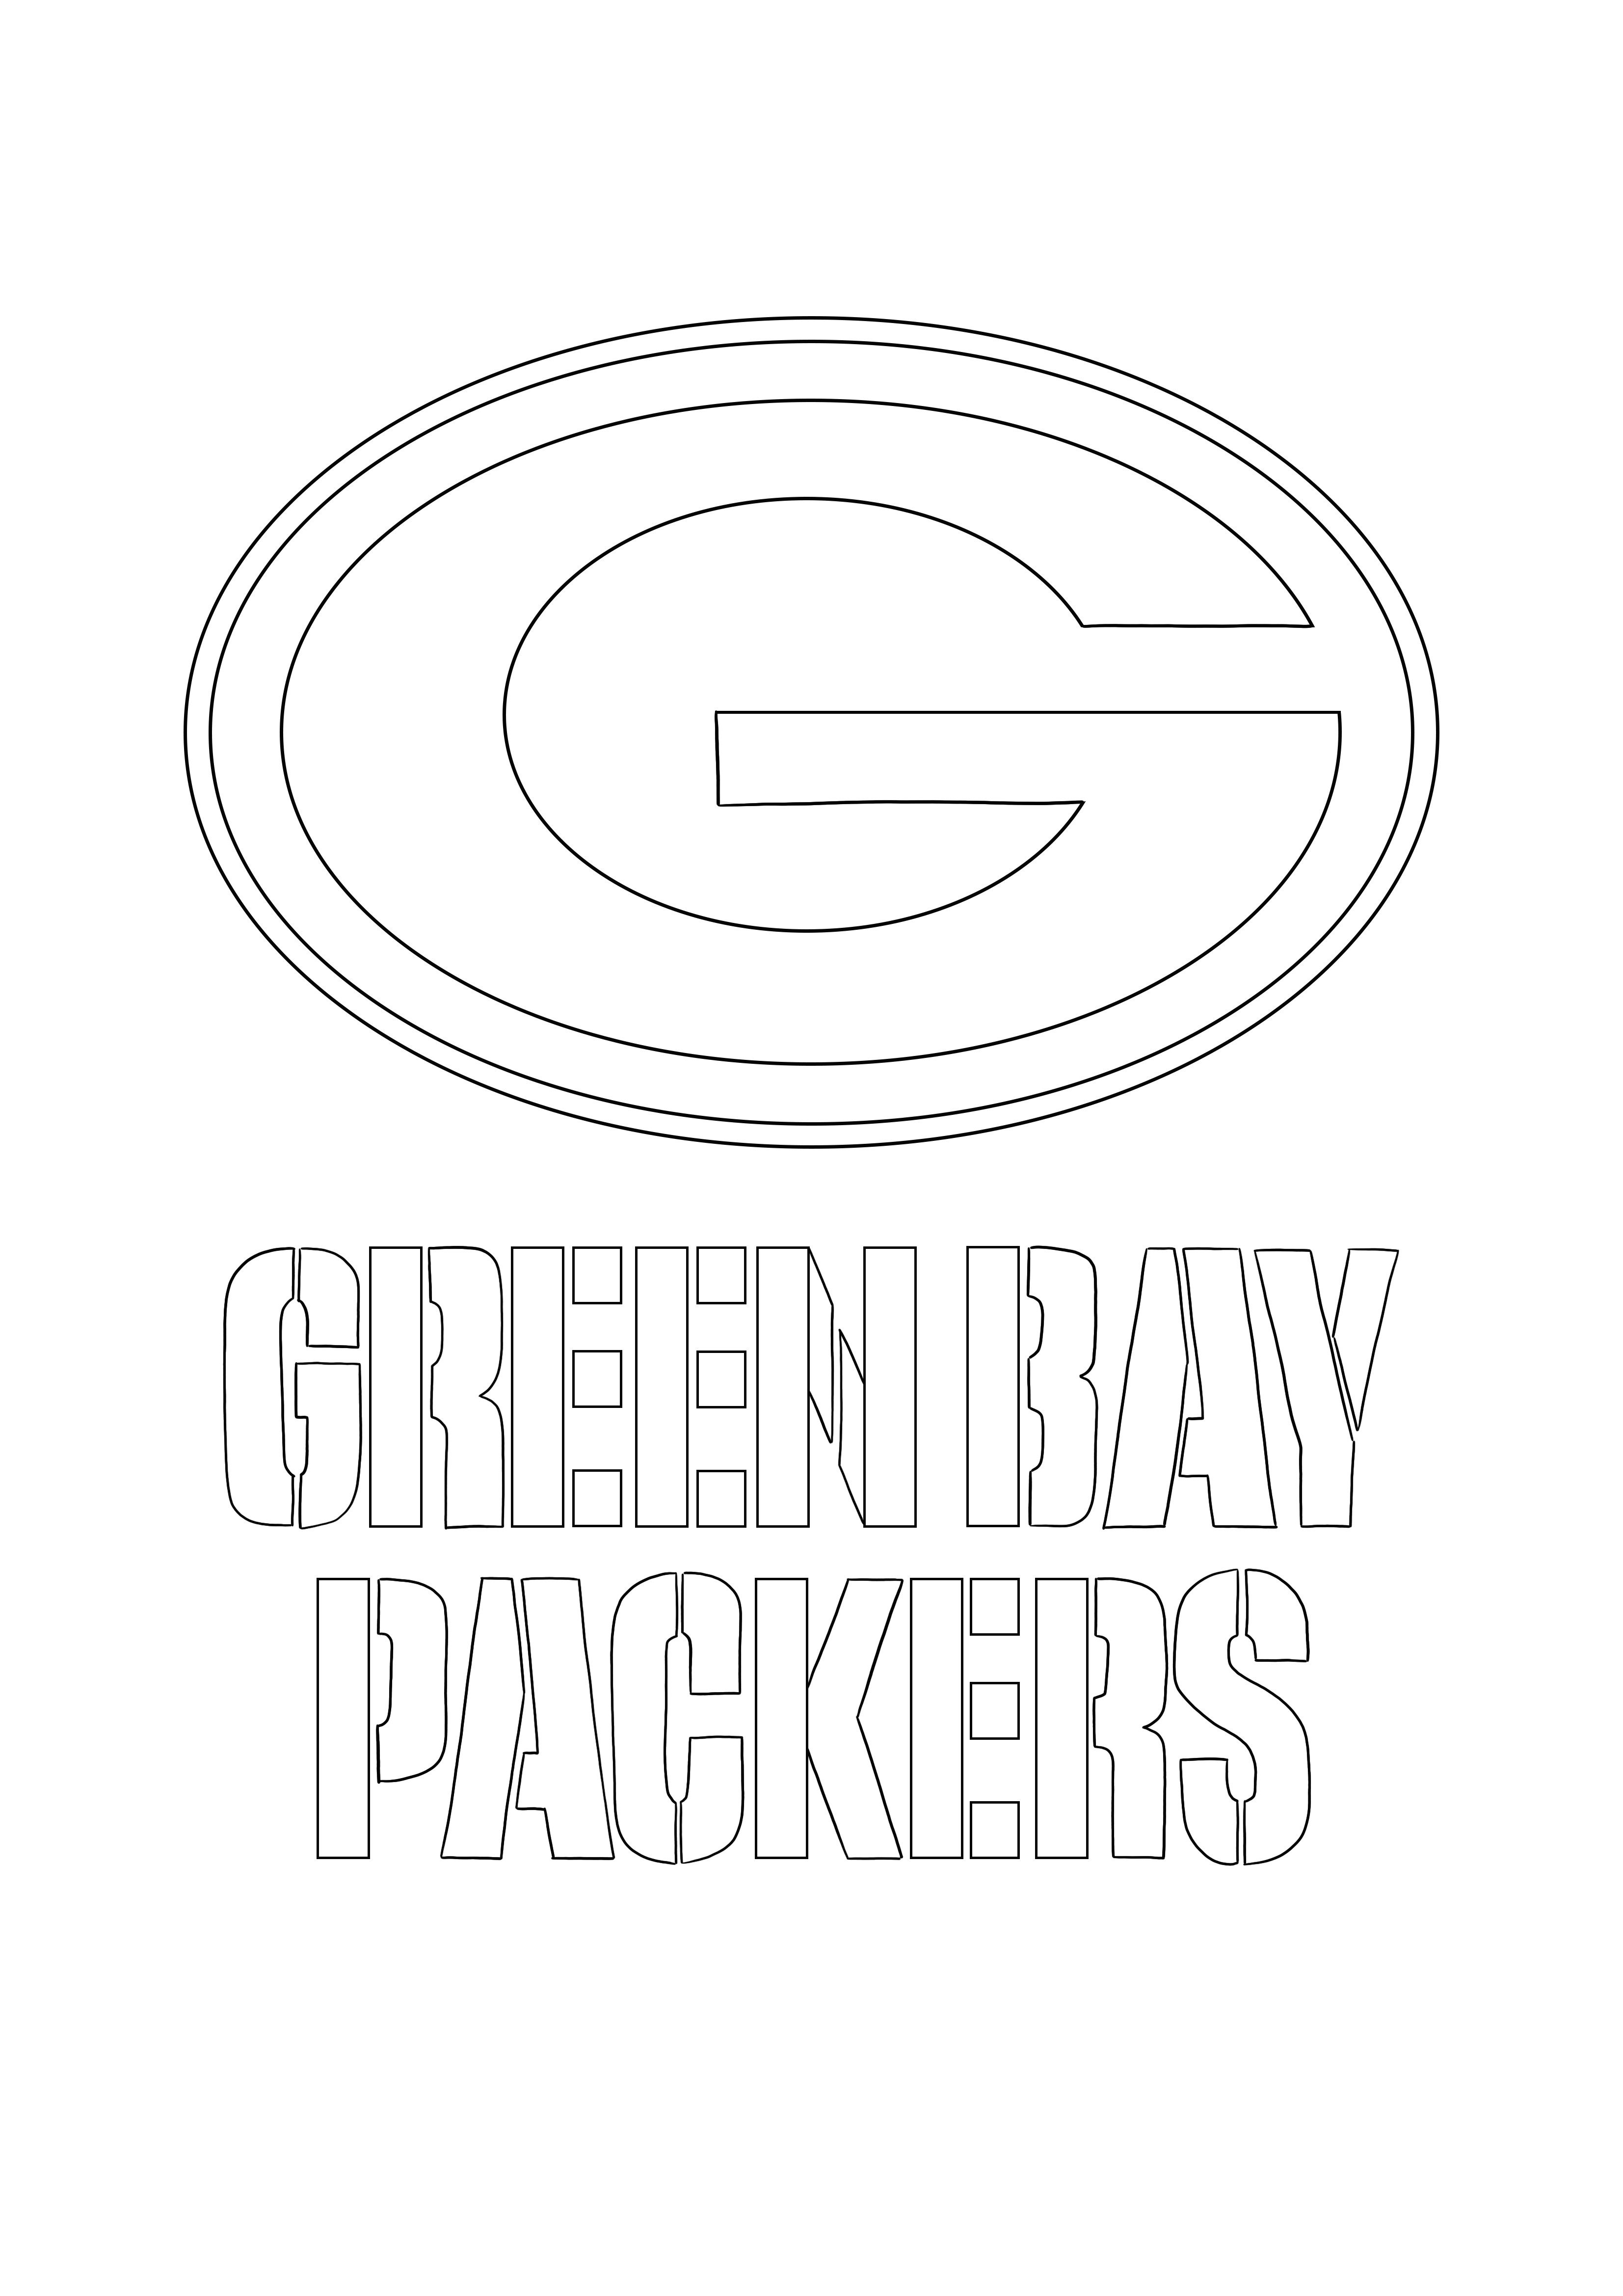 Green Bay Packers Logo free for coloring and printing page for kids